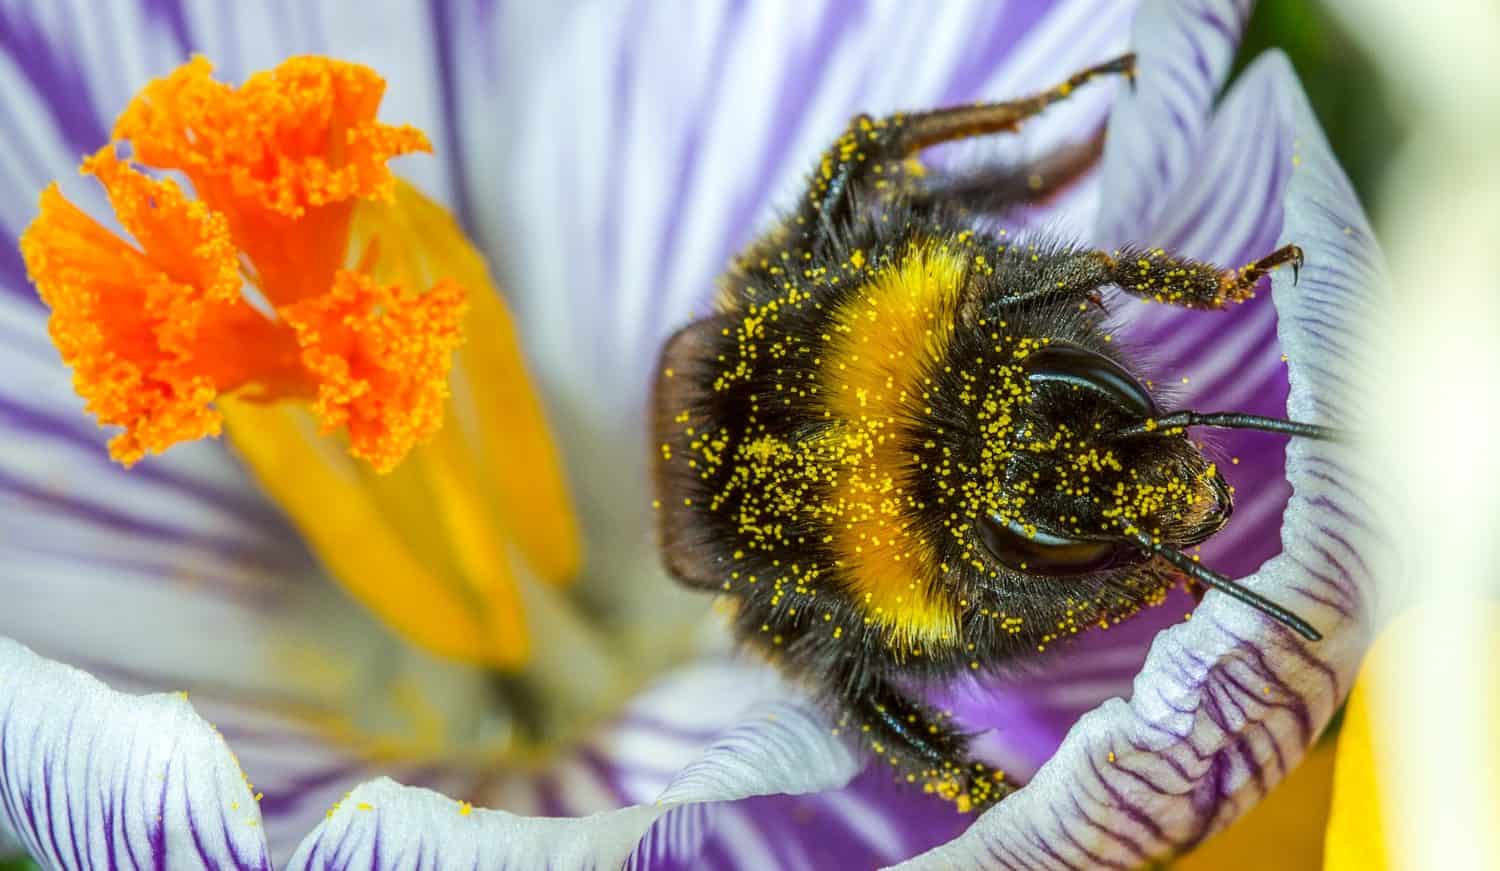 Buff-tailed Bumblebee emerging from a crocus flower covered in pollen